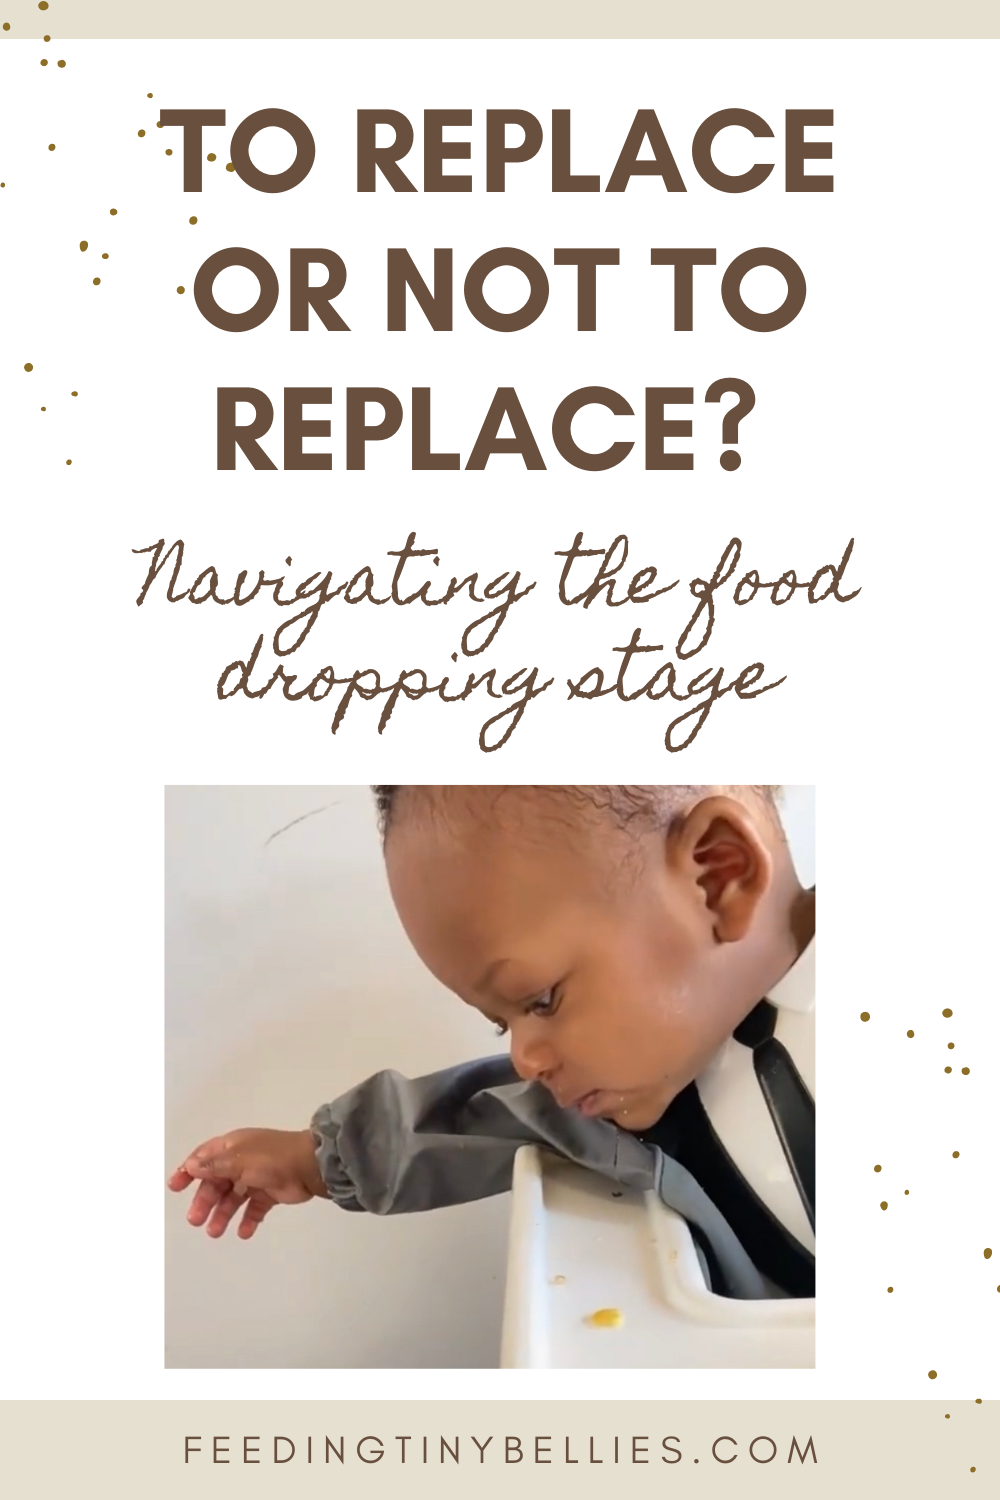 To replace or not to replace? Navigating the food dropping stage.